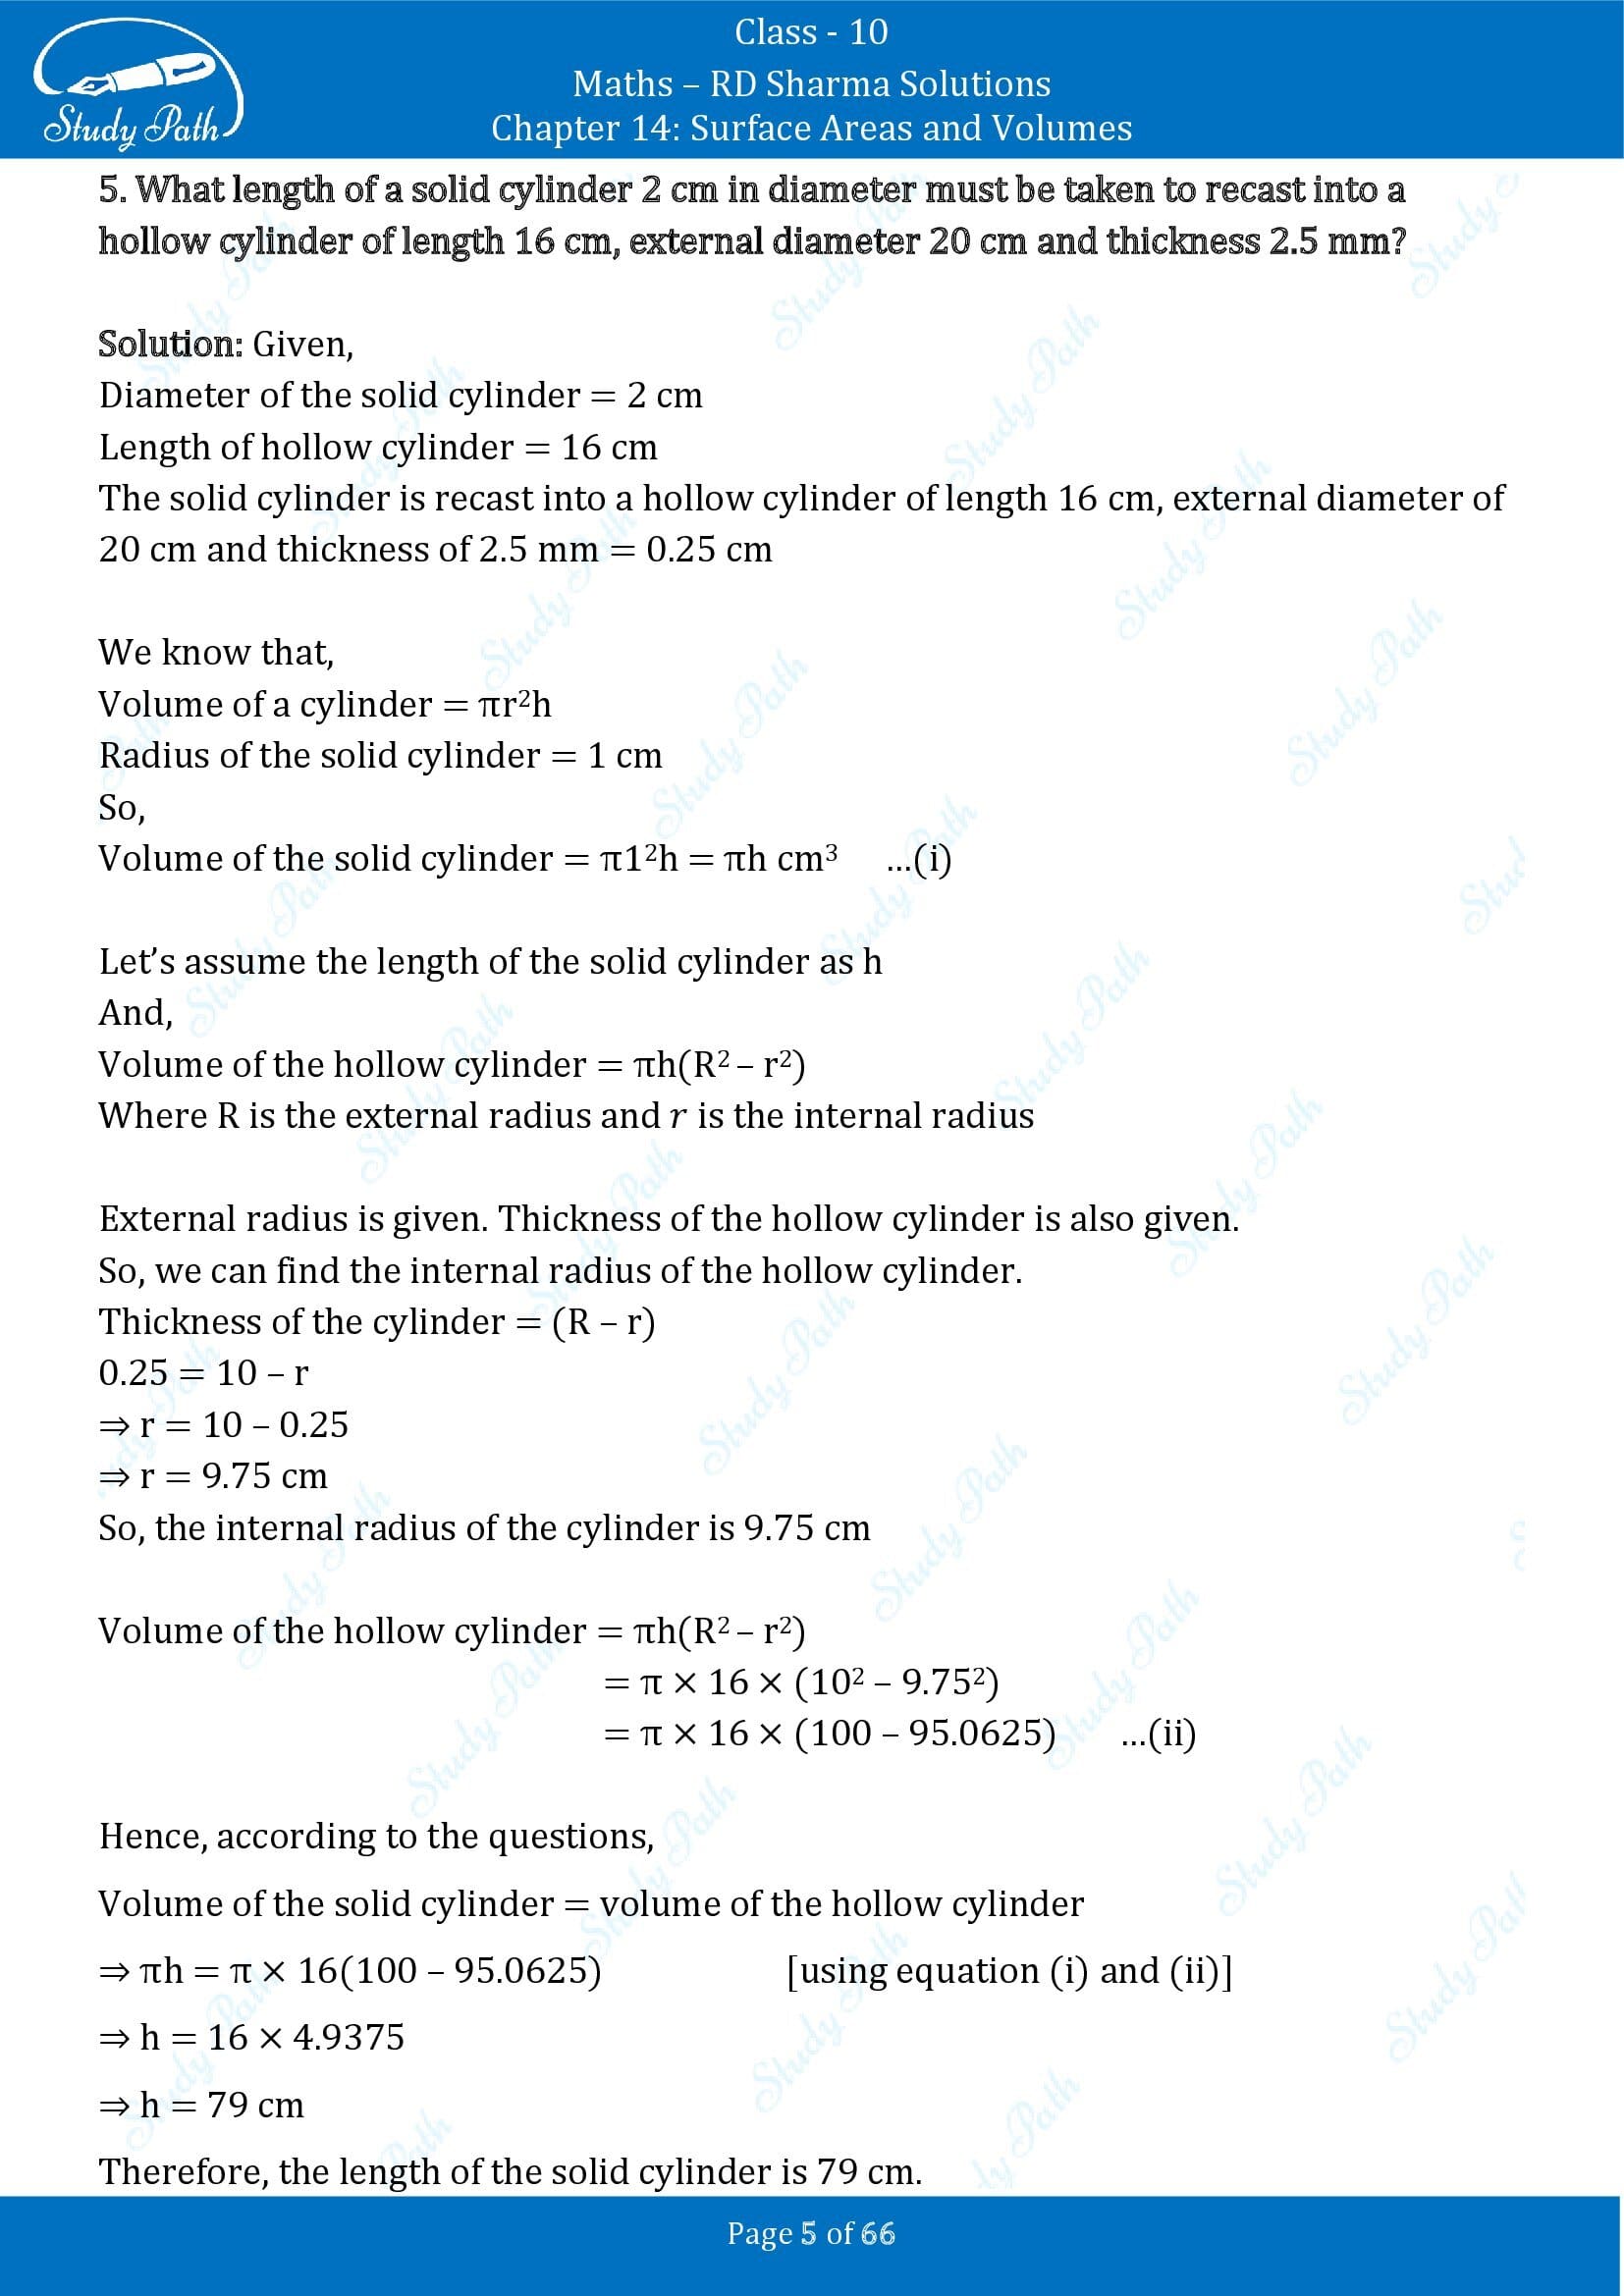 RD Sharma Solutions Class 10 Chapter 14 Surface Areas and Volumes Exercise 14.1 00005